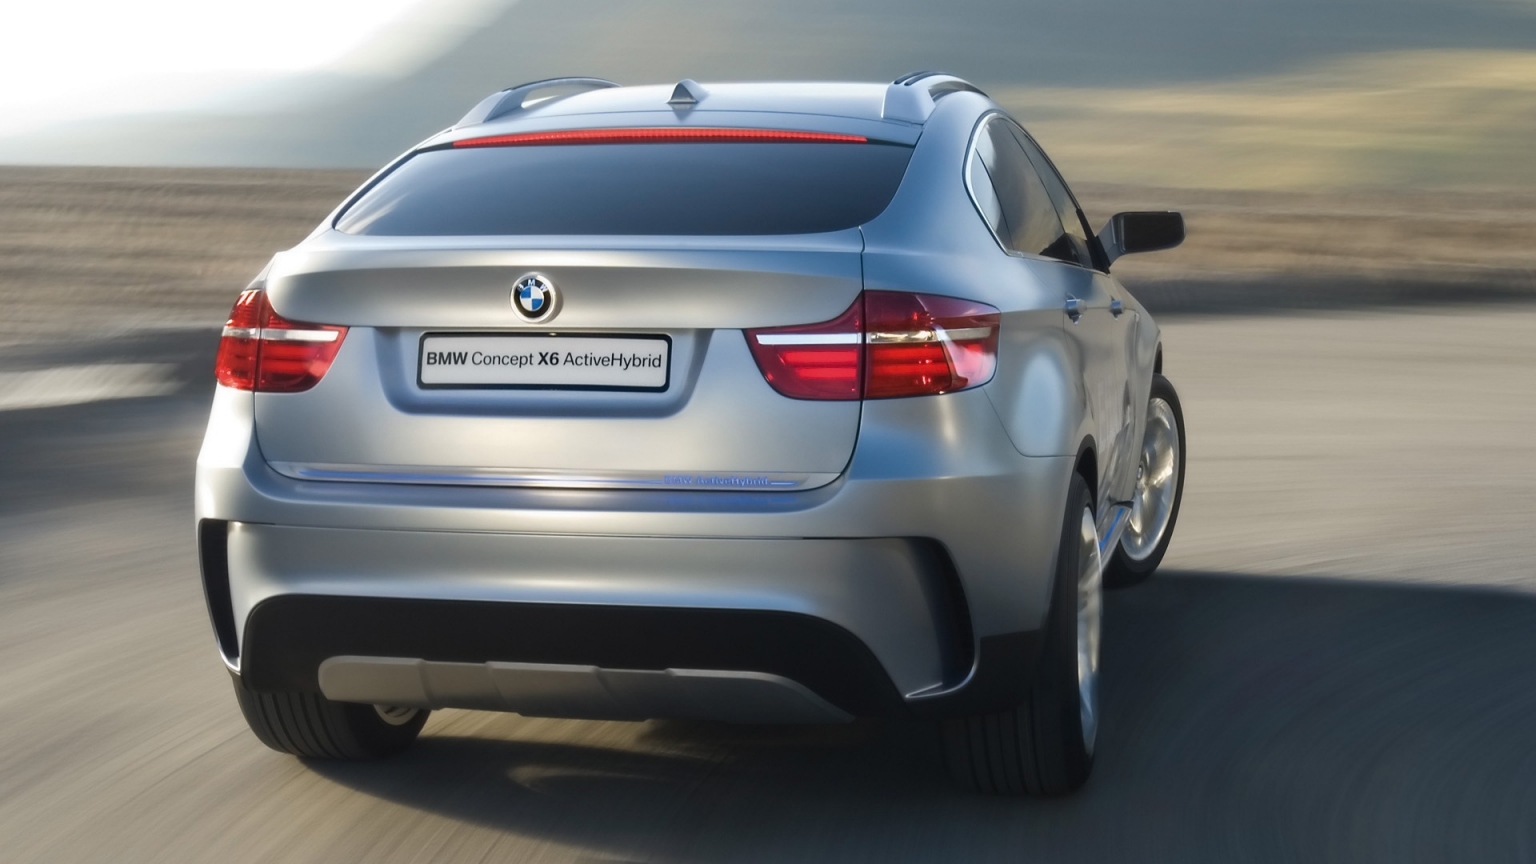 BMW Concept X6 ActiveHybrid Rear 2007 for 1536 x 864 HDTV resolution